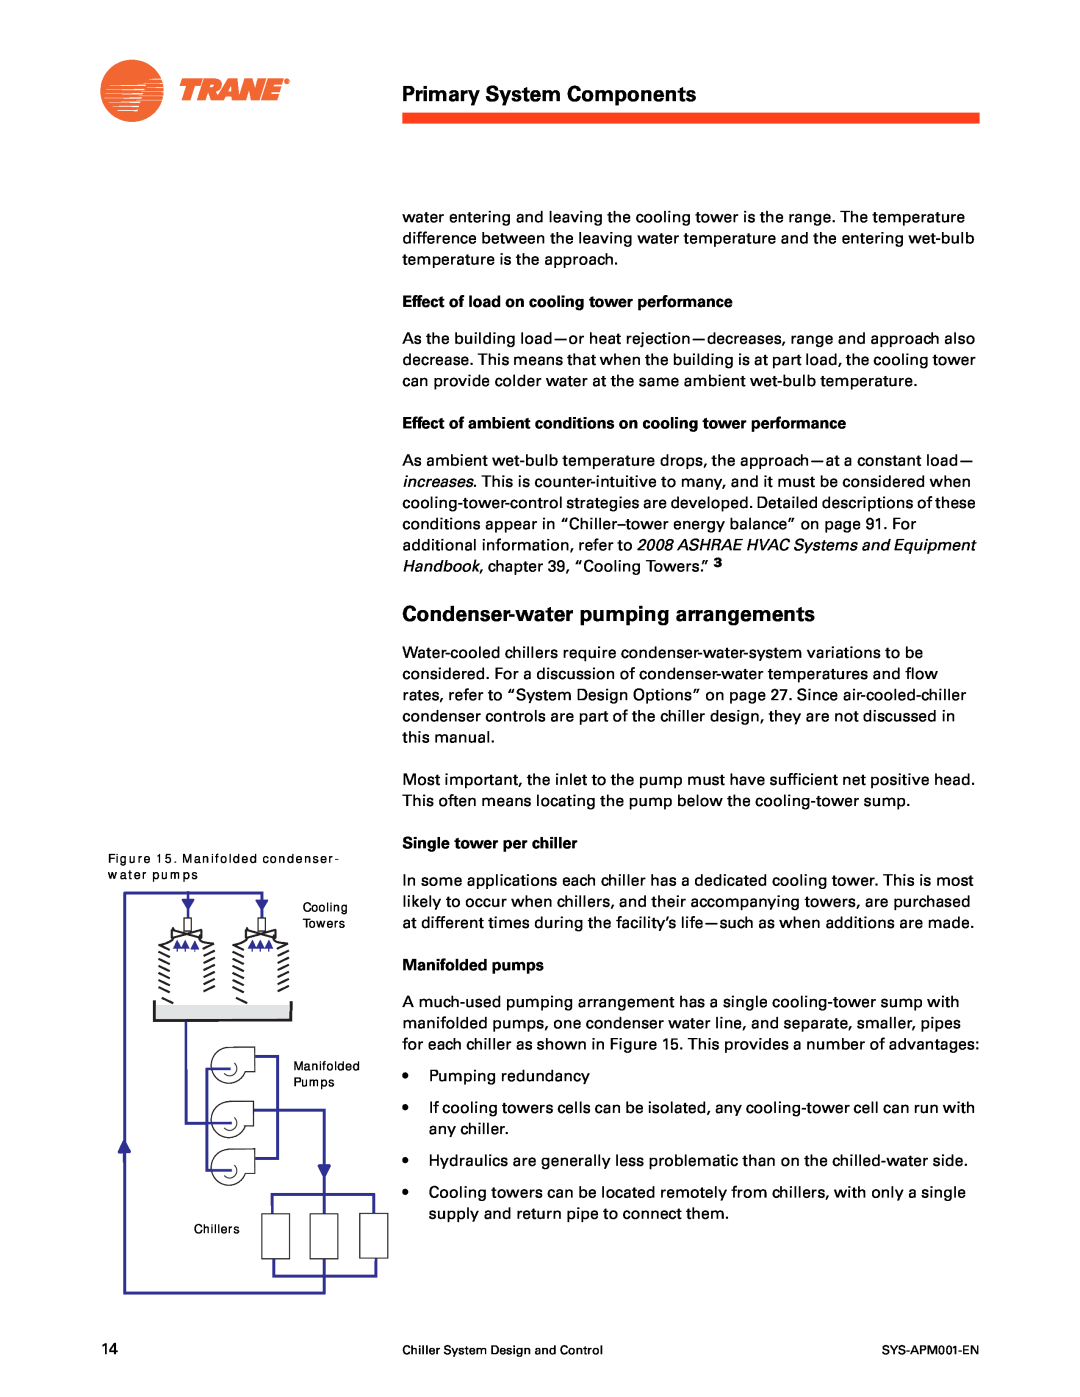 Trane SYS-APM001-EN manual Condenser-water pumping arrangements, Primary System Components, Single tower per chiller 